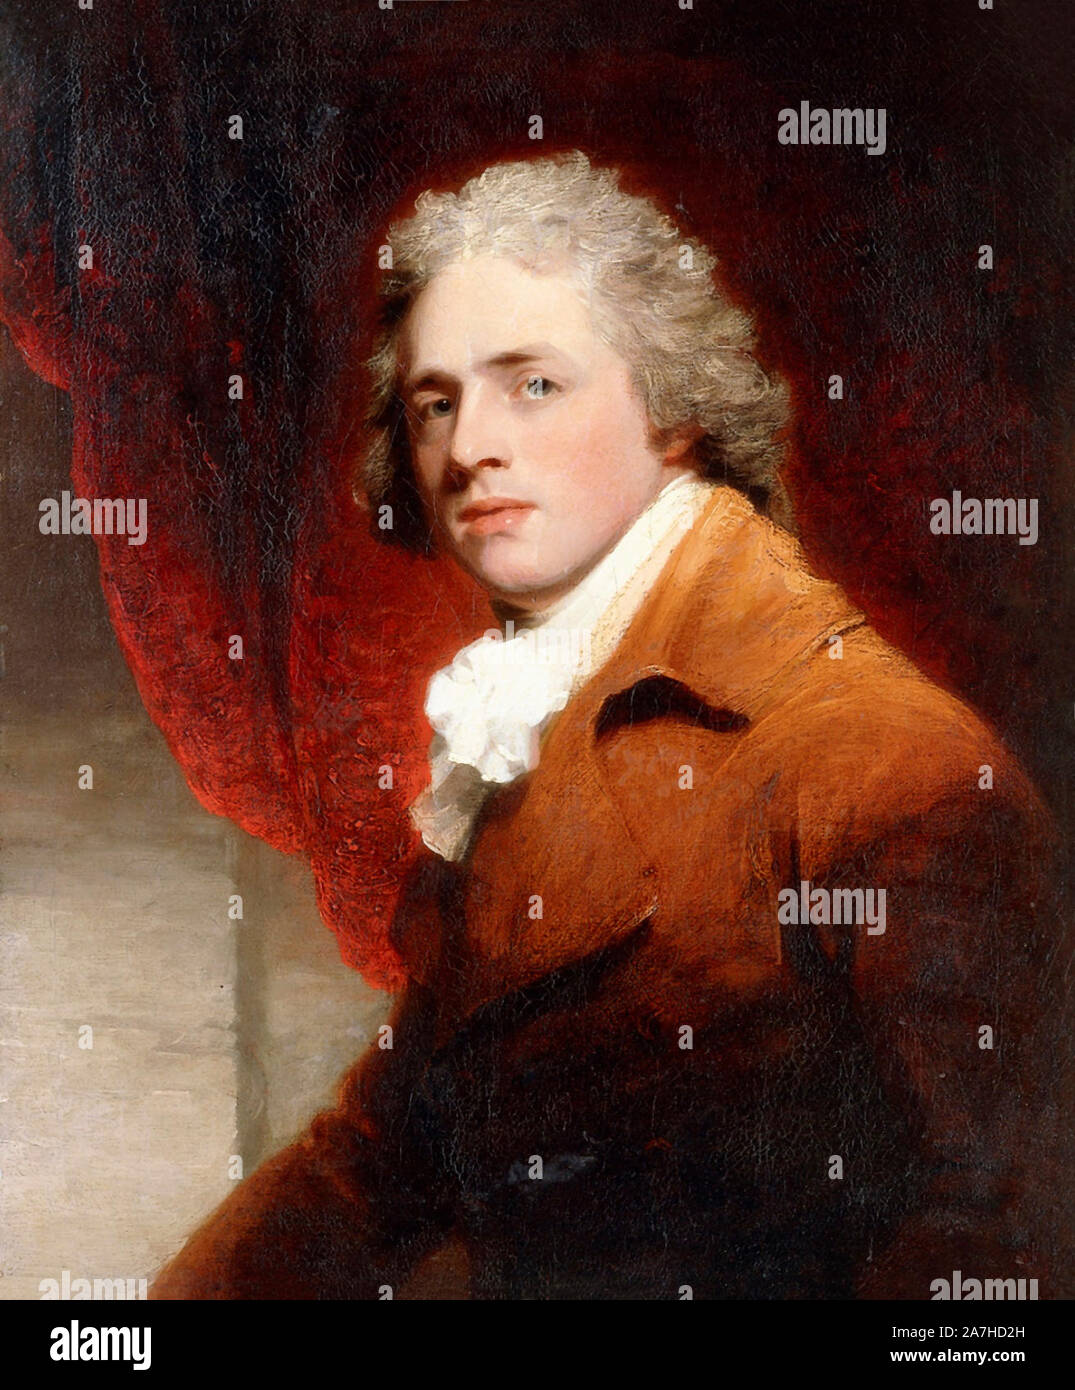 Portrait of a Gentleman, Half-Length, in a Brown and White Stock, a Red Curtain Behind - John Hoppner.   The sitter has traditionally been identified as Richard Brinsley Sheridan (1751-1816) Stock Photo